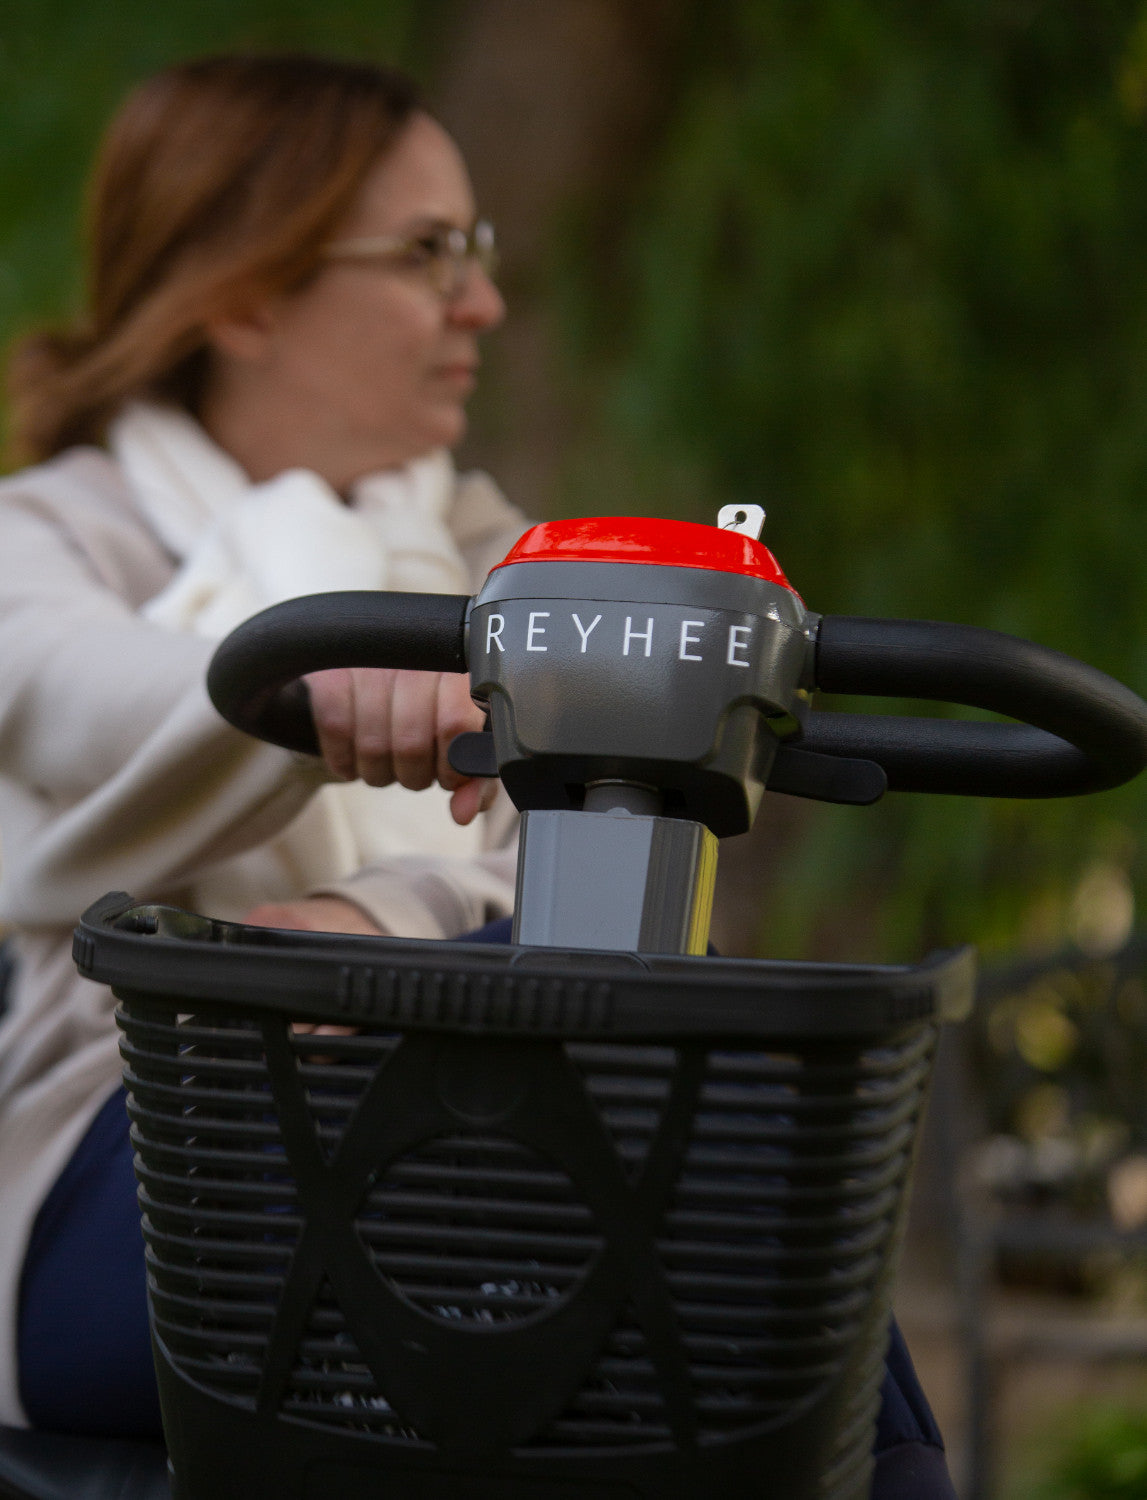 Close up of the front of the red Reyhee Cruiser mobility scooter with a woman's hand on the handle as she looks to the side in the background